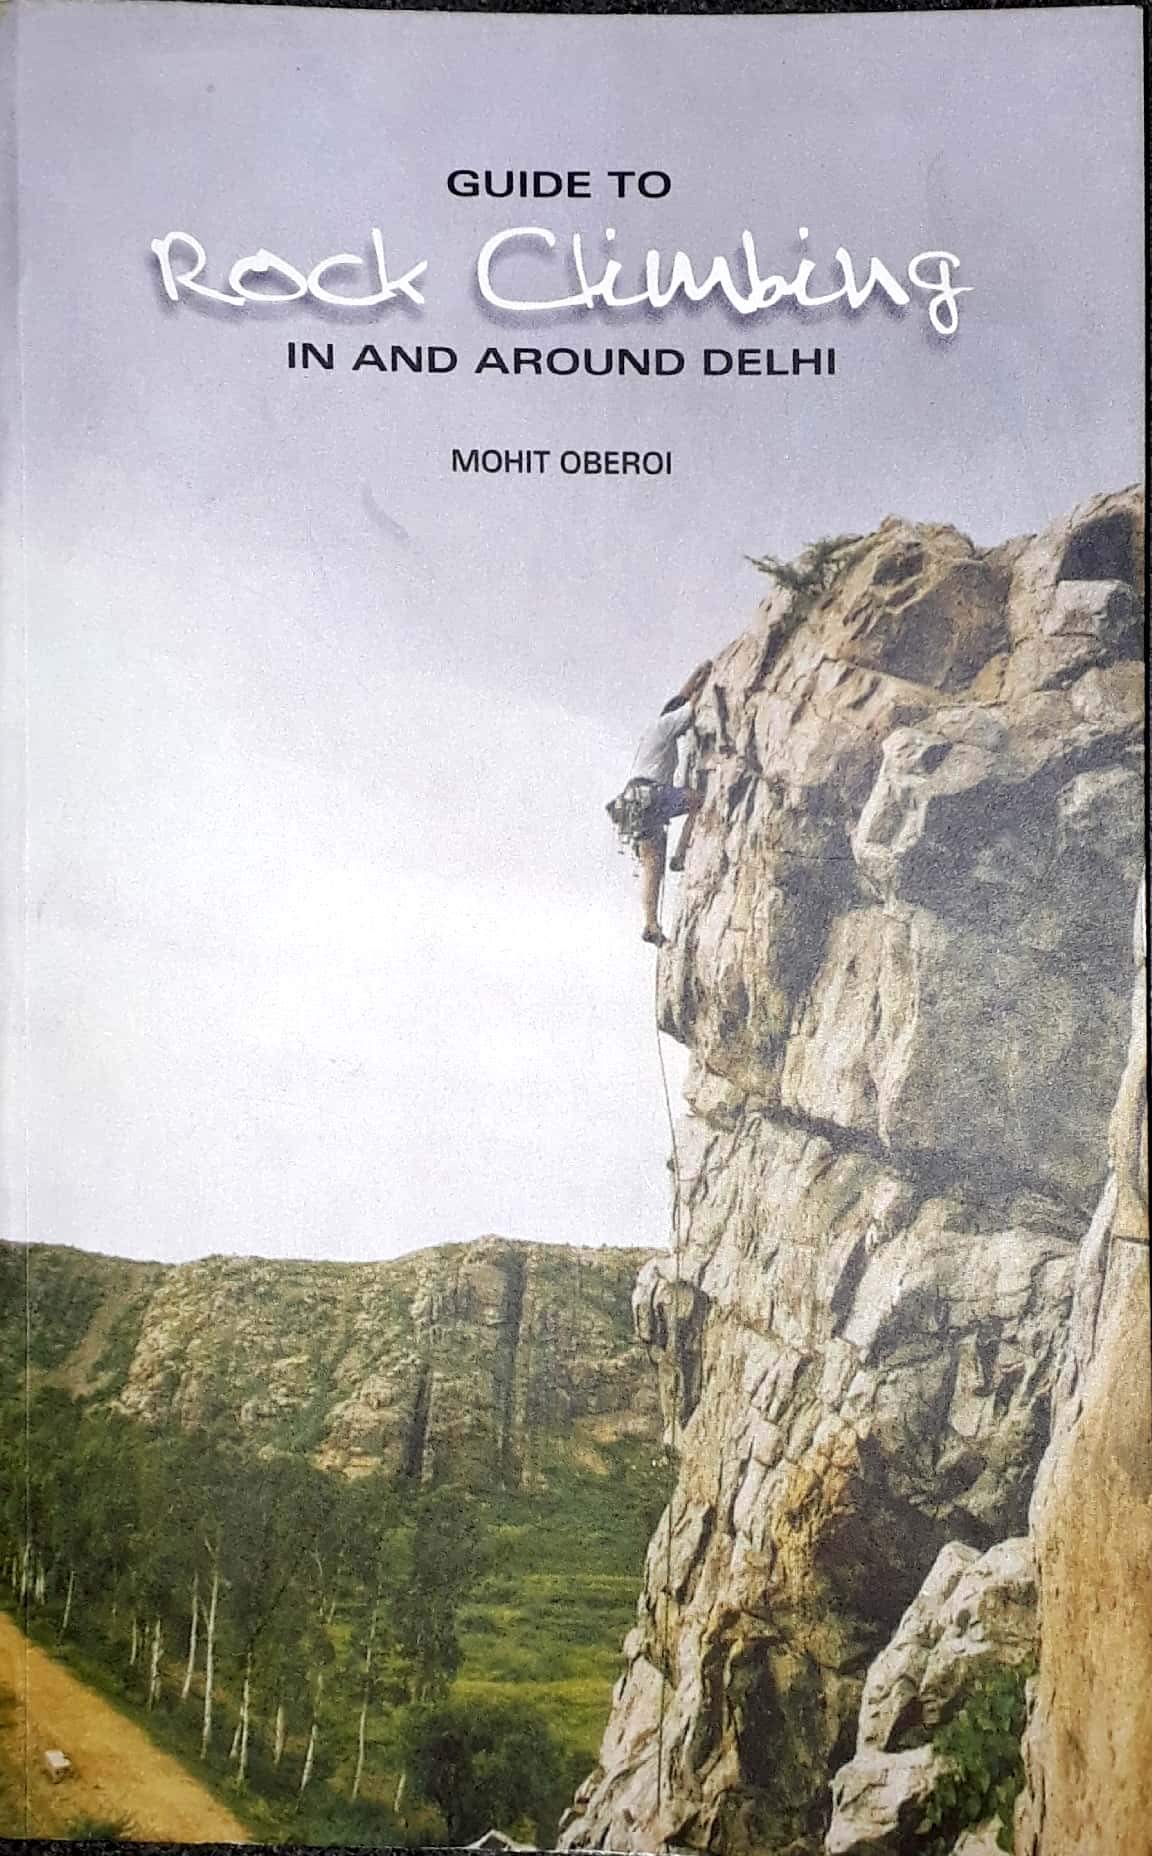 Guide to Rock Climbing in and around Delhi